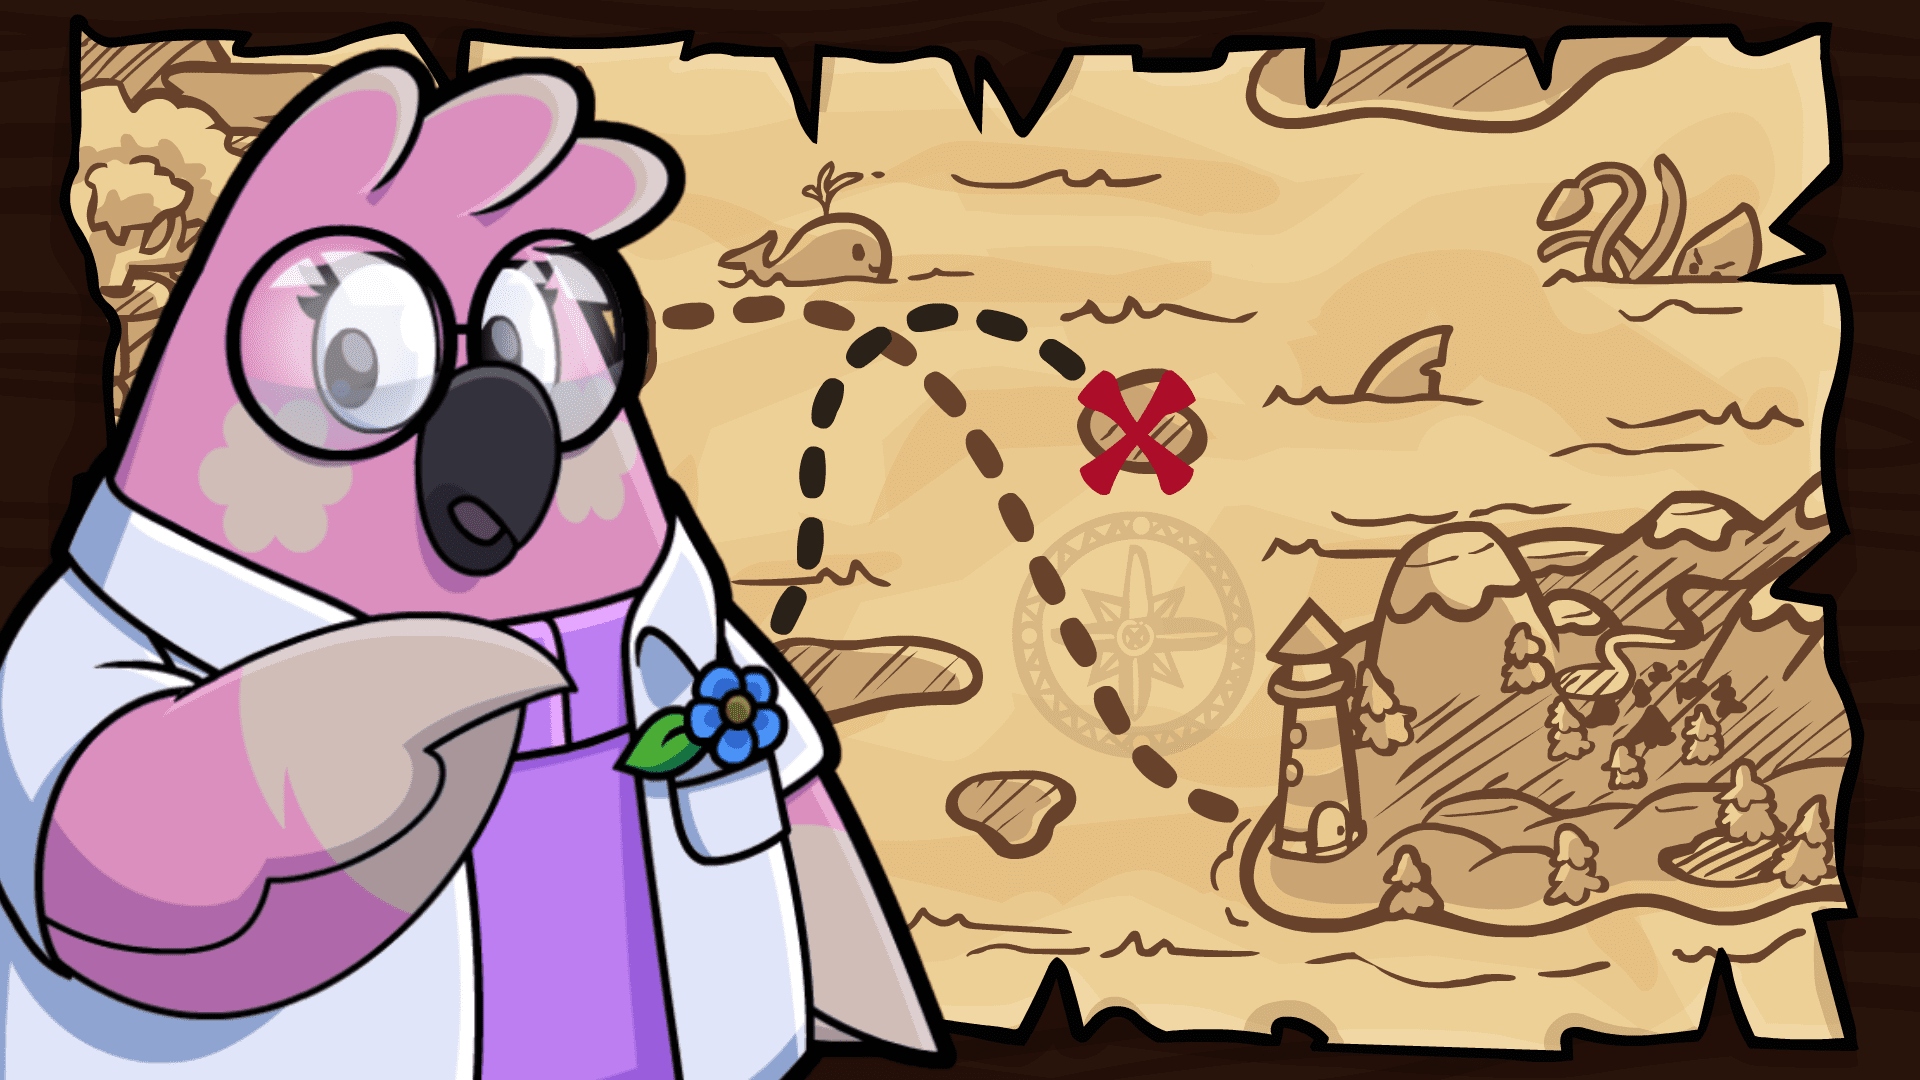 Pia the pink parrot botanist has a blue flower in her lab coat pocket. She is standing in front of an ancient treasure map with a line going to a red X. This begins the outdoor scavenger hunt riddles for kids!